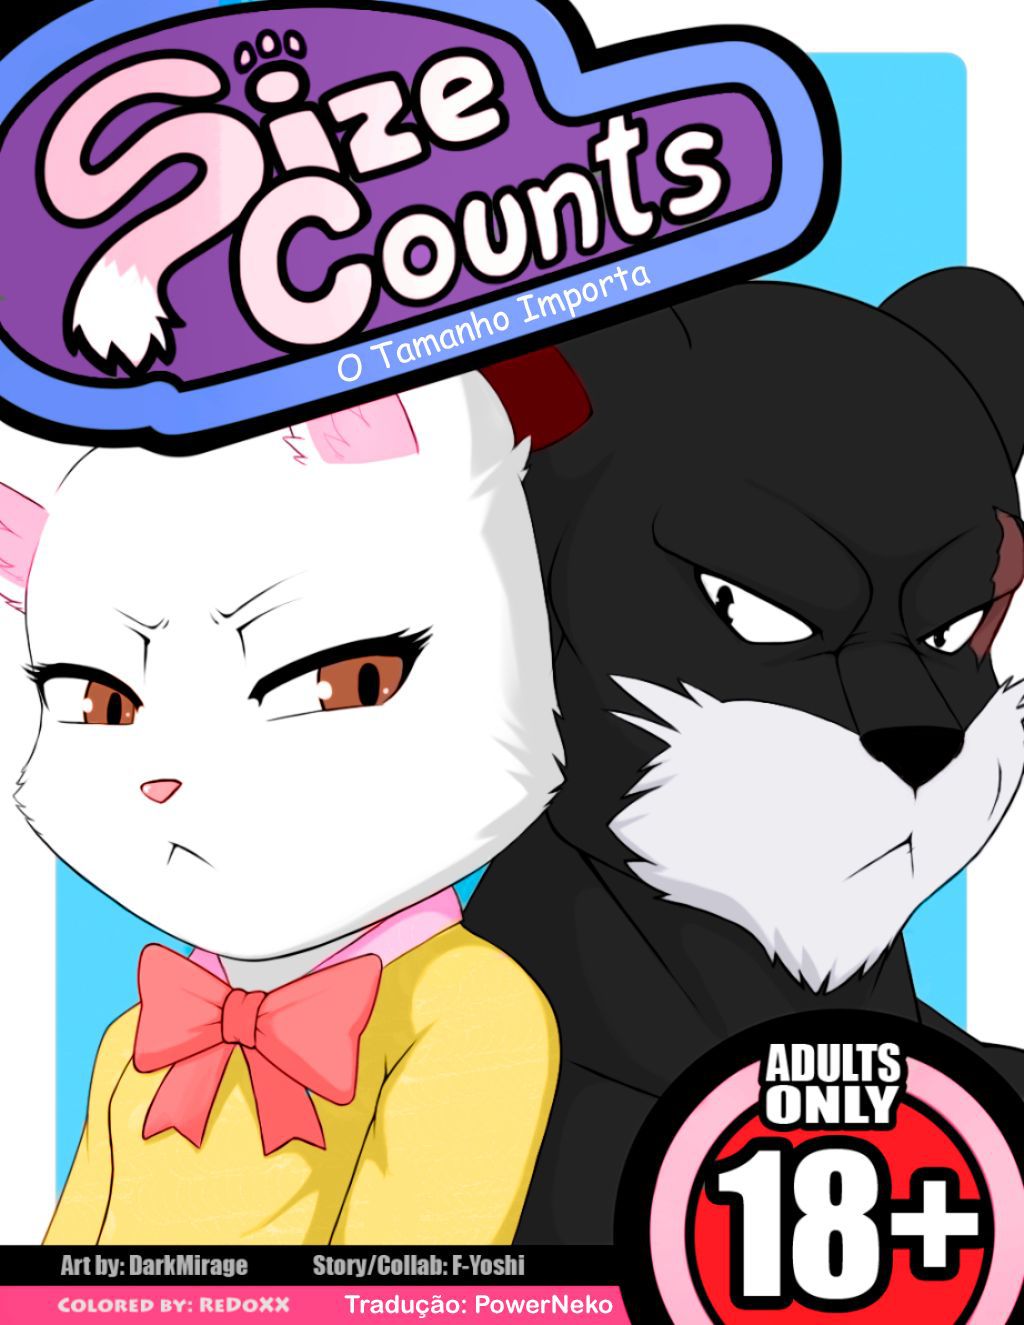 [Darkmirage]Size Counts (O Tamanho Importa) [Colorized by ReDoXX] [Portuguese-BR] [Translated by PowerNeko] 1